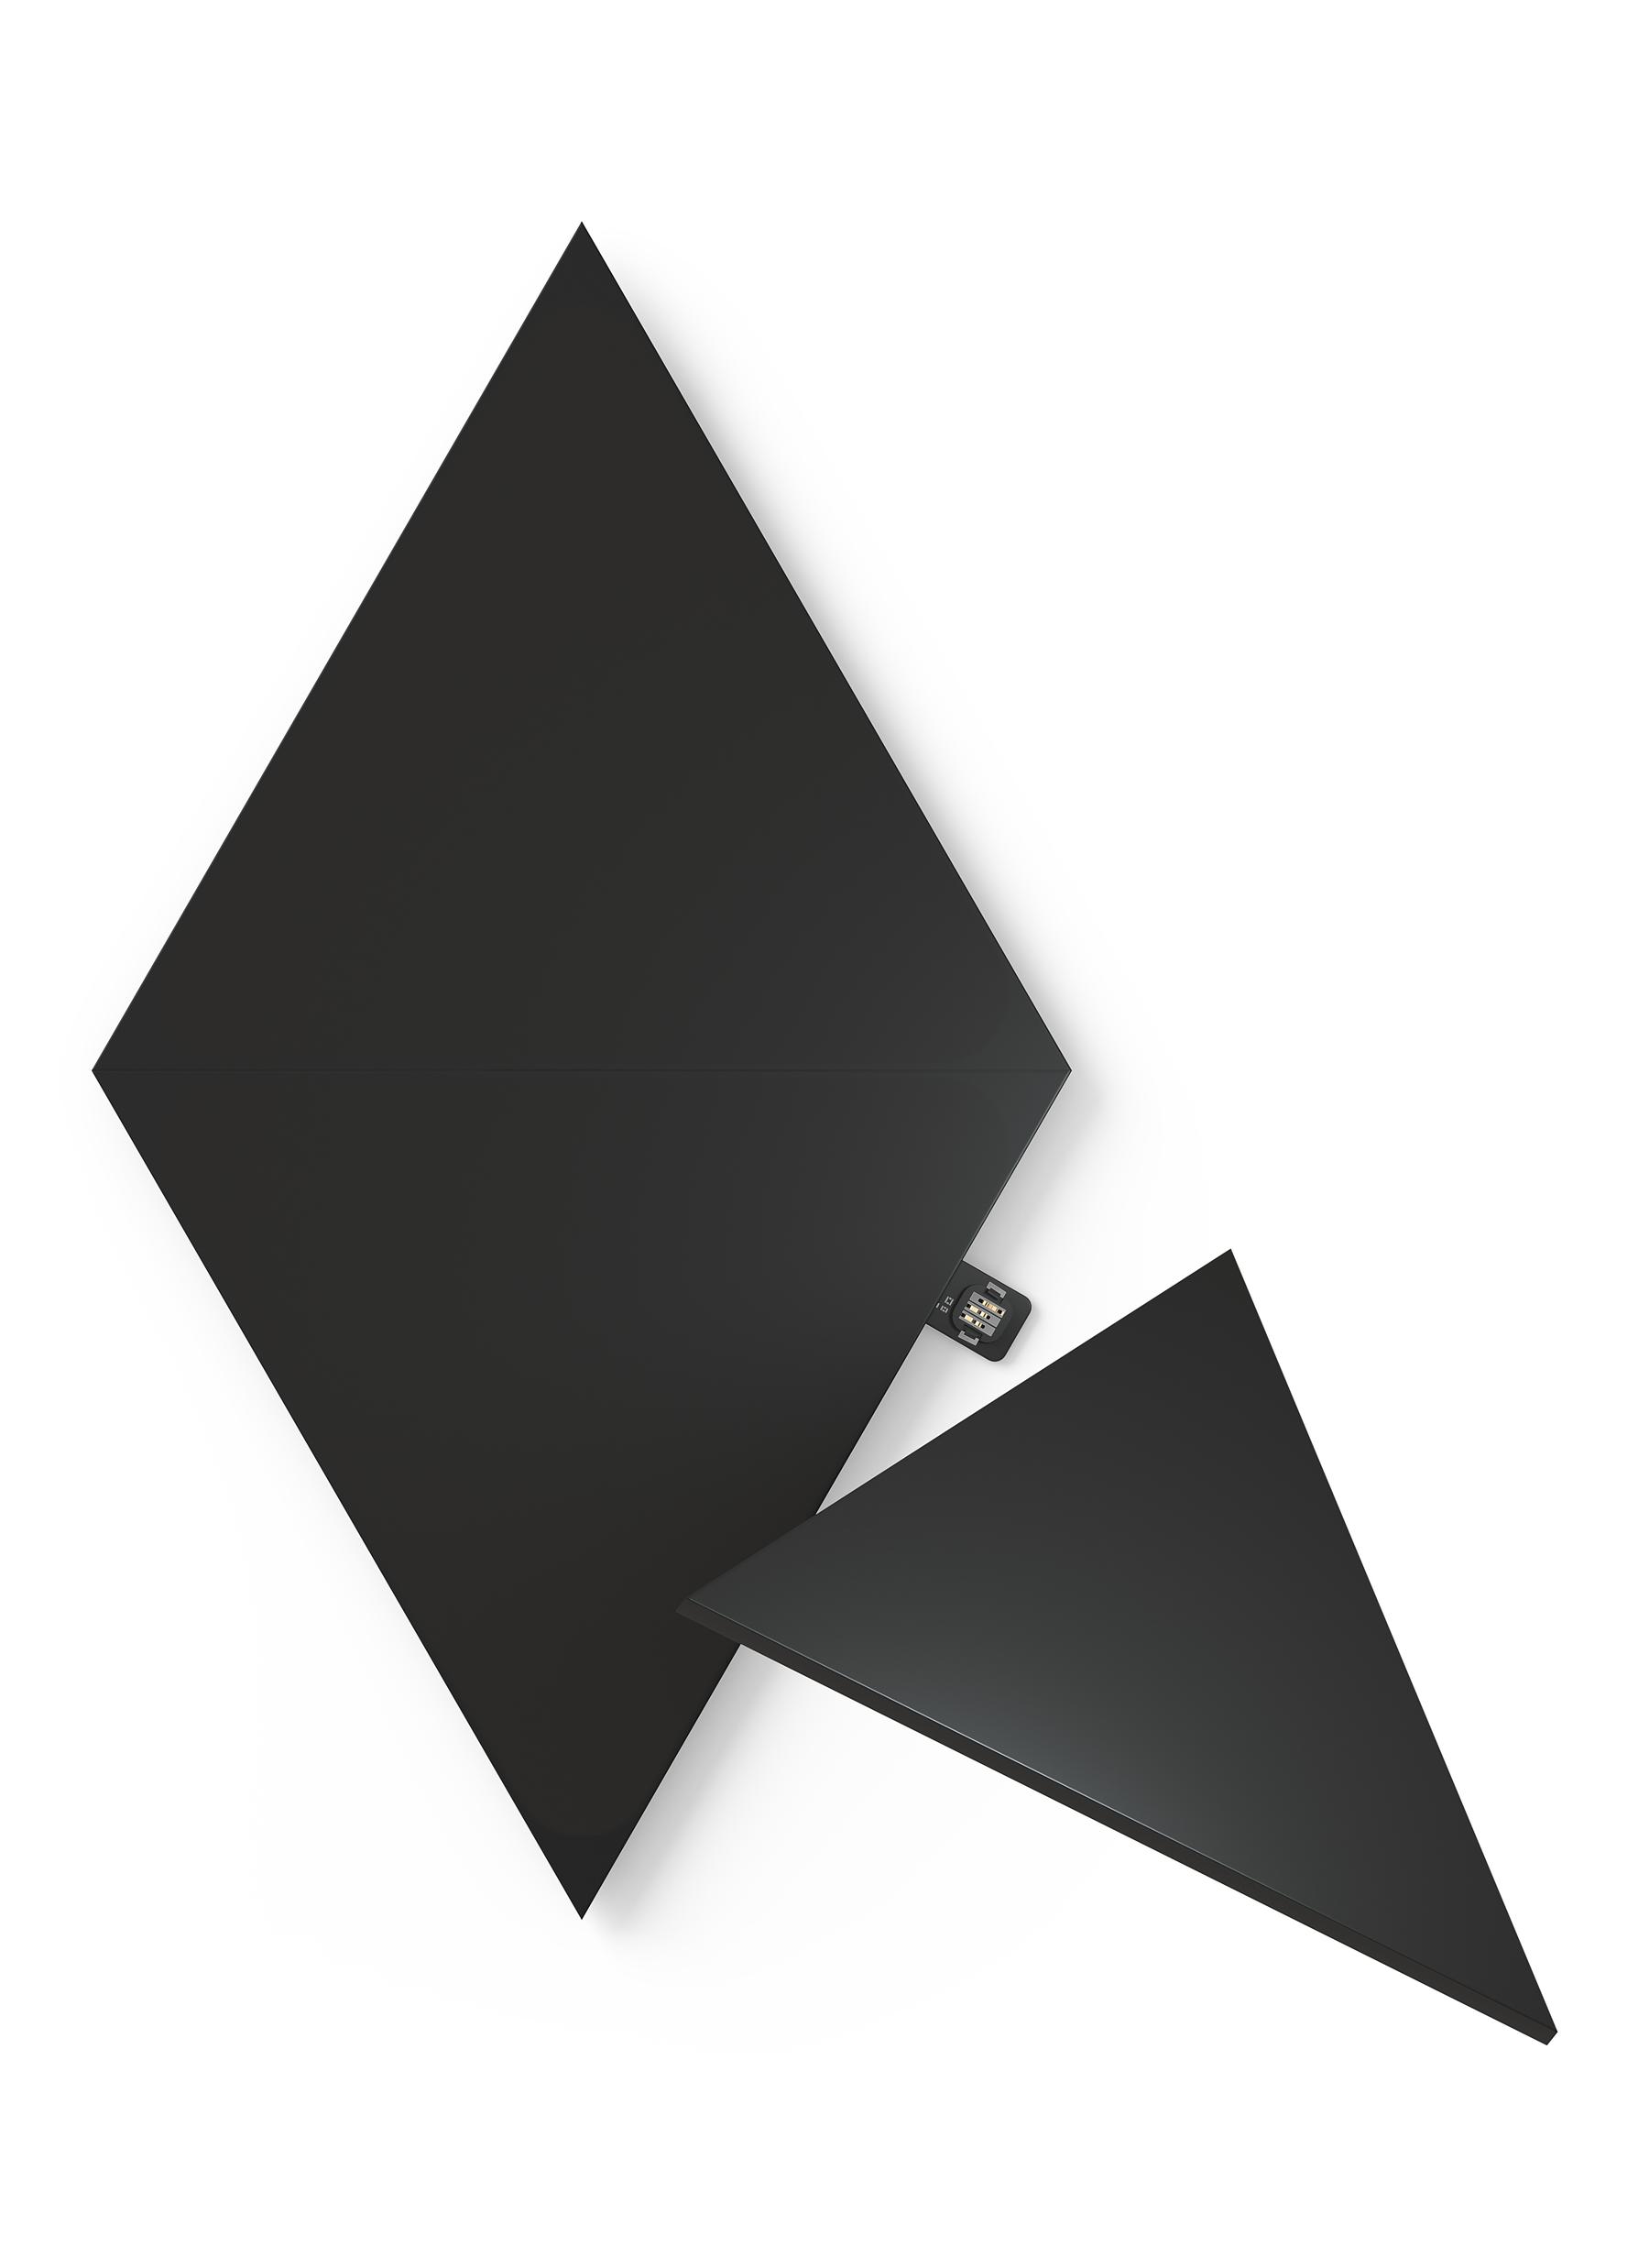 LIMITED EDITION SHAPES TRIANGLE STARTER KIT PACK OF 3 - ULTRA BLACK